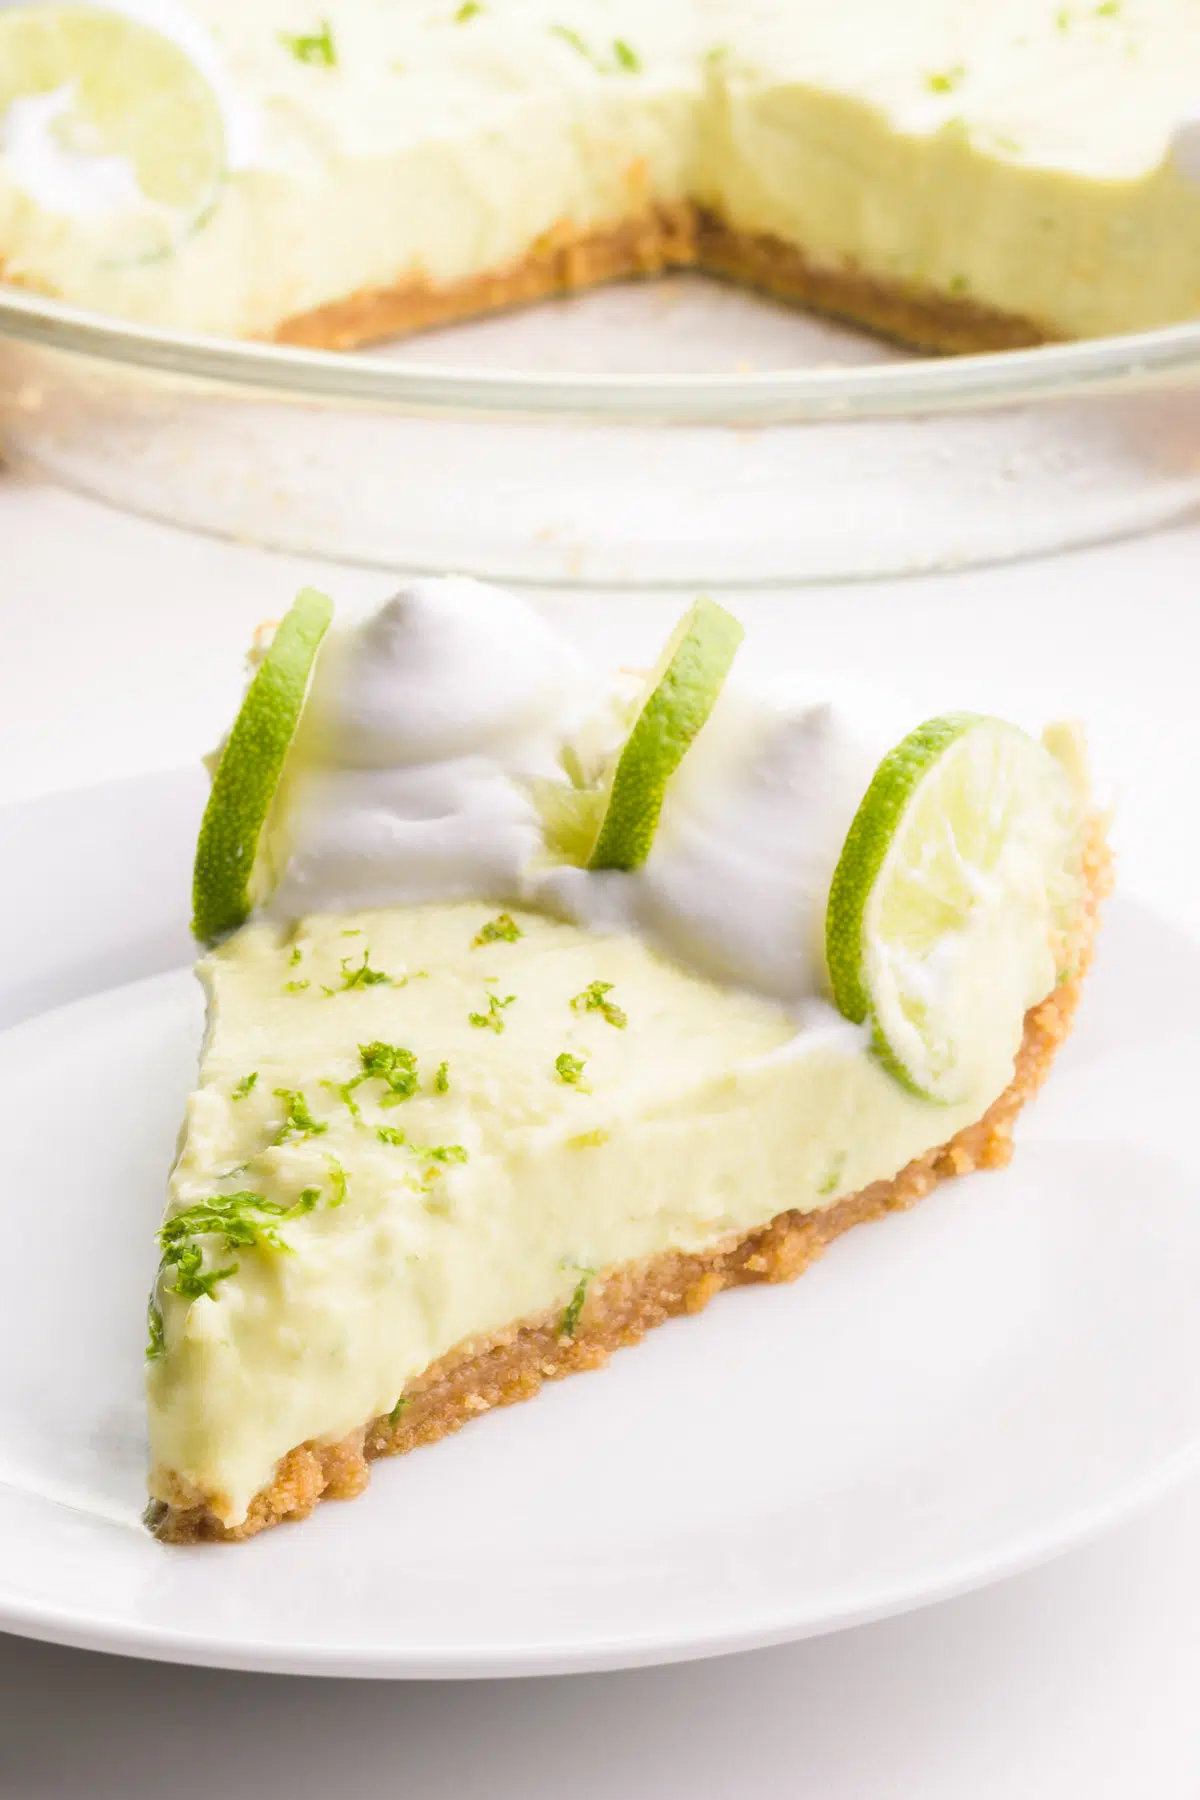 A slice of vegan key lime pie sits on a plate. It has whipped cream and lime slices on the pie. The rest of the pie is in the background.